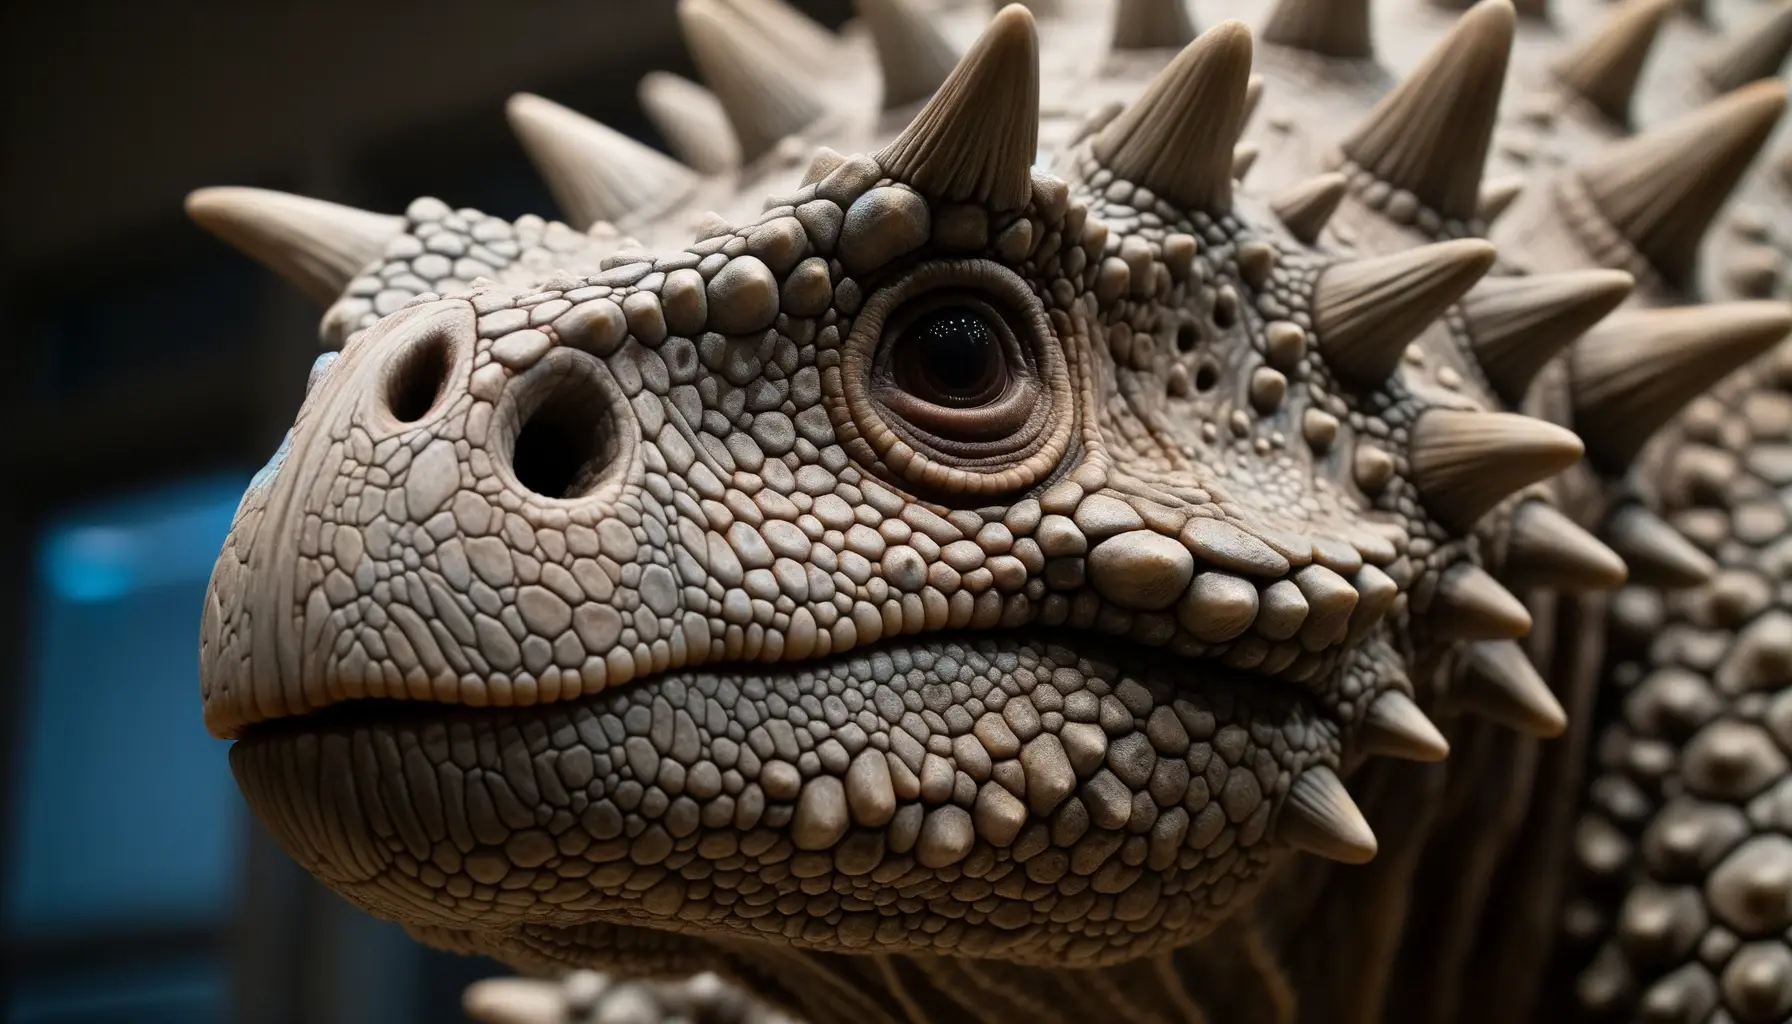 Close-up of Ankylosaurus's head with blunt snout and peg-like teeth.